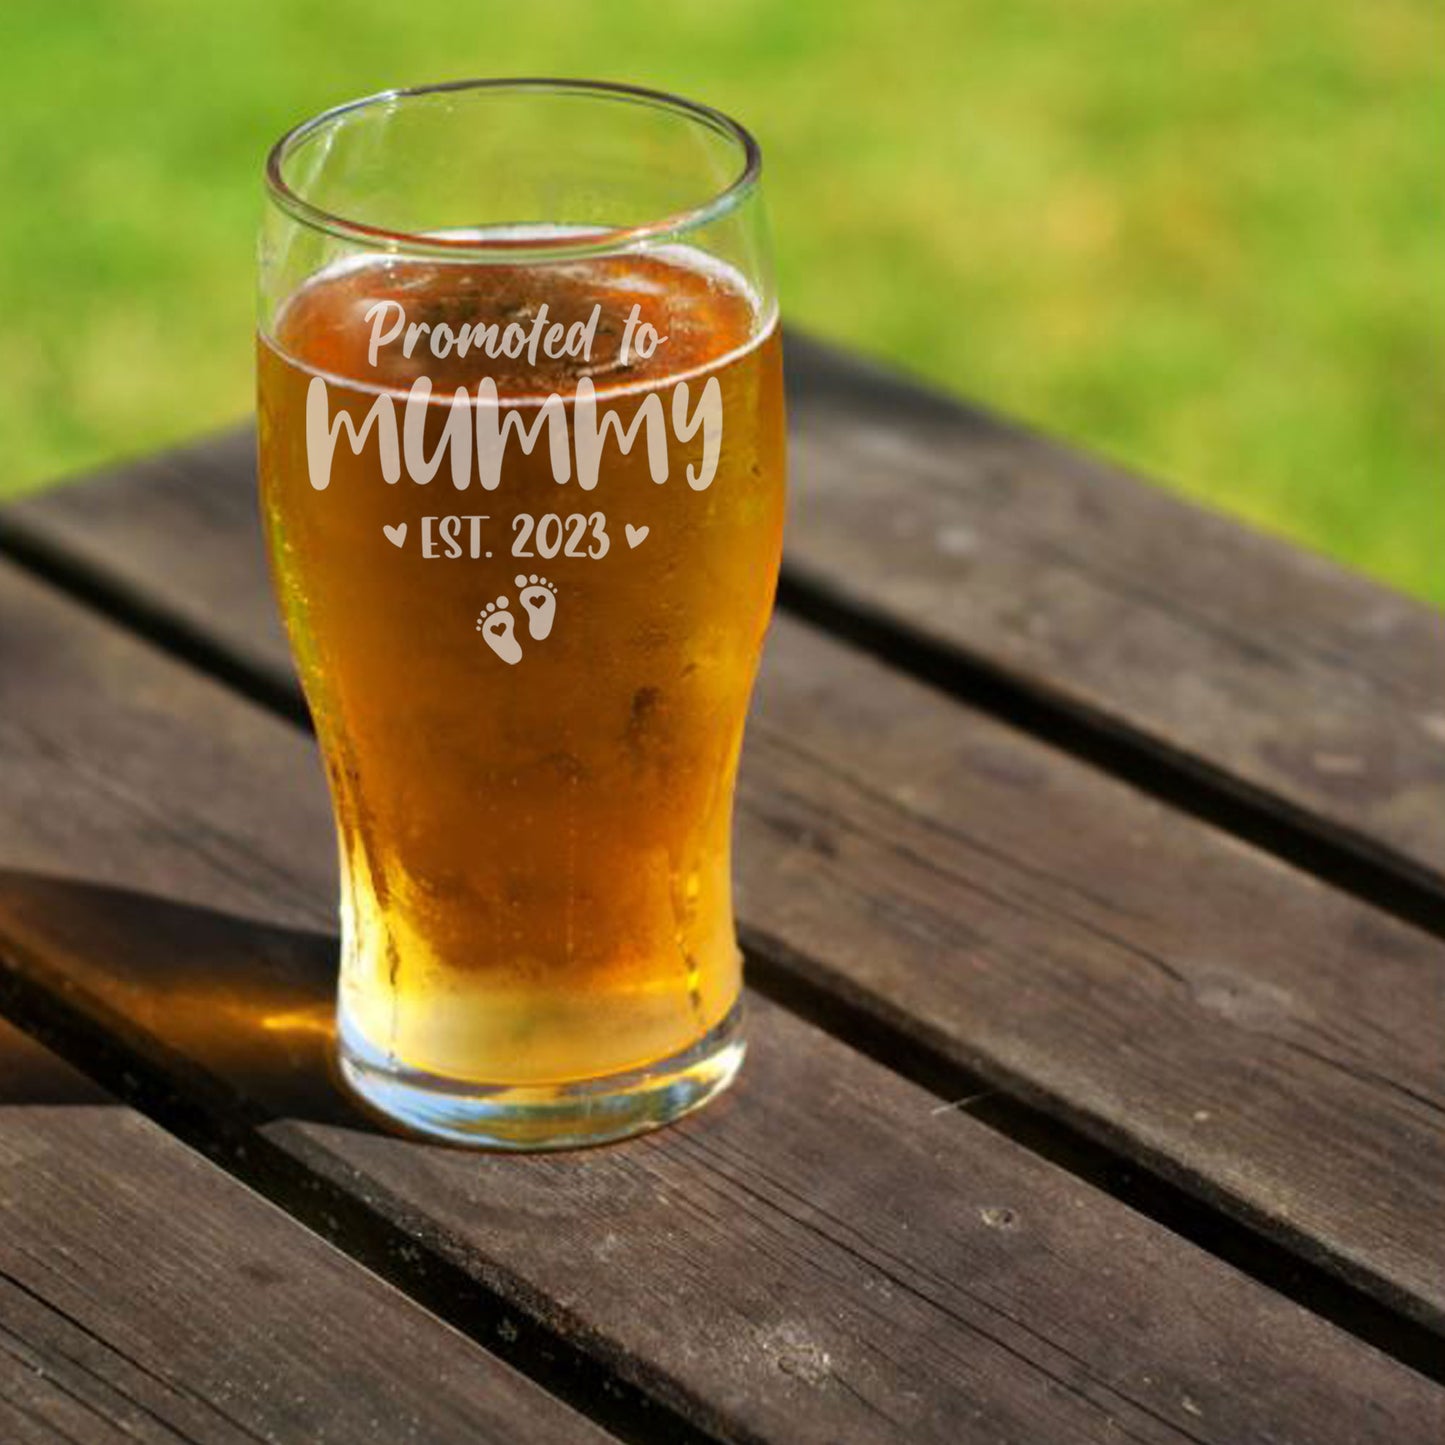 Promoted To Mummy Engraved Pint Glass  - Always Looking Good -   